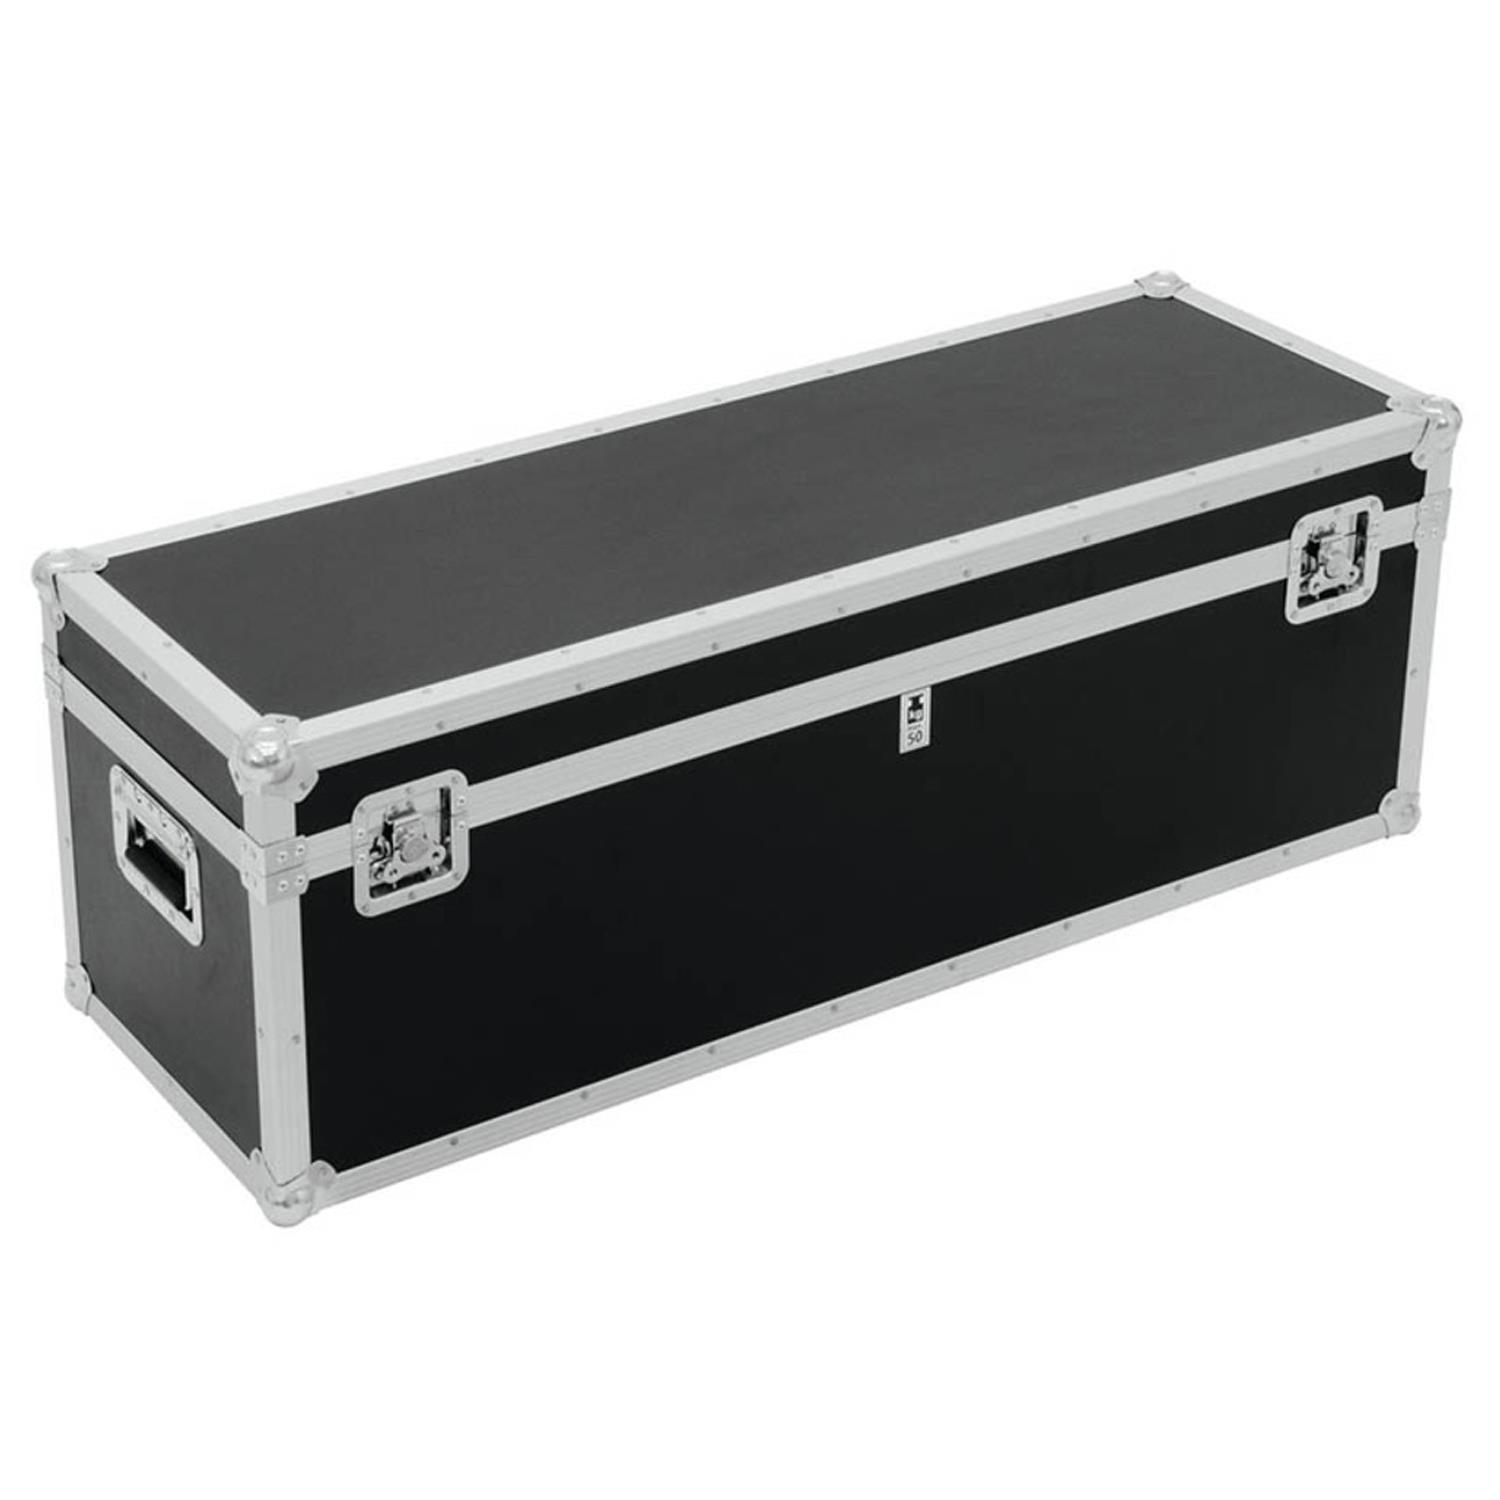 StageCore FC83 1195x400x423mm Stacking Flight Case - DY Pro Audio